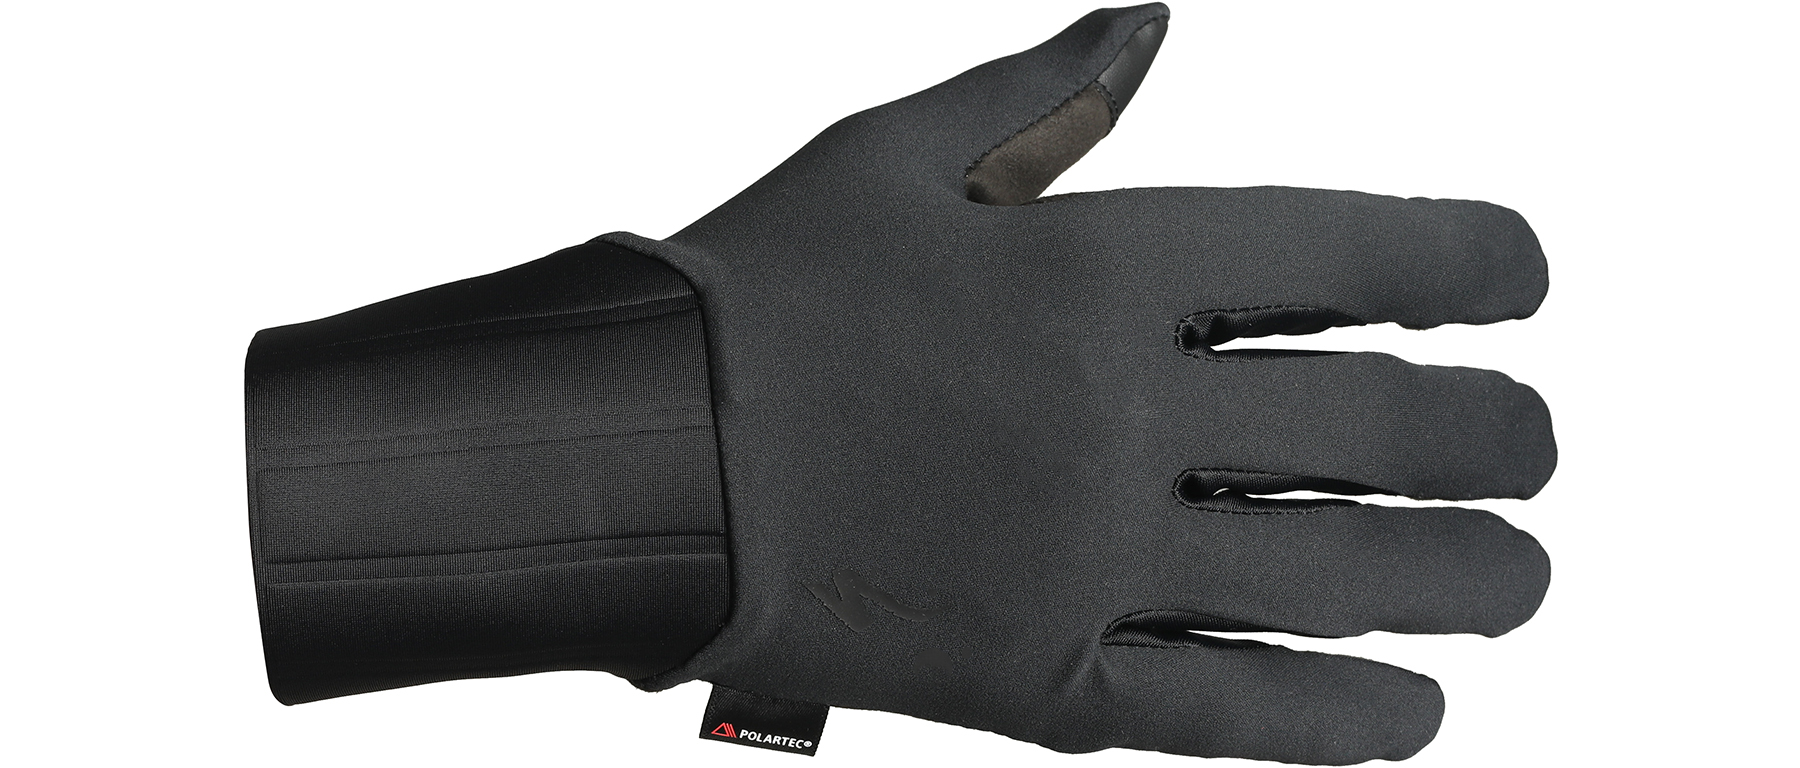 Specialized Prime-Series Thermal Glove